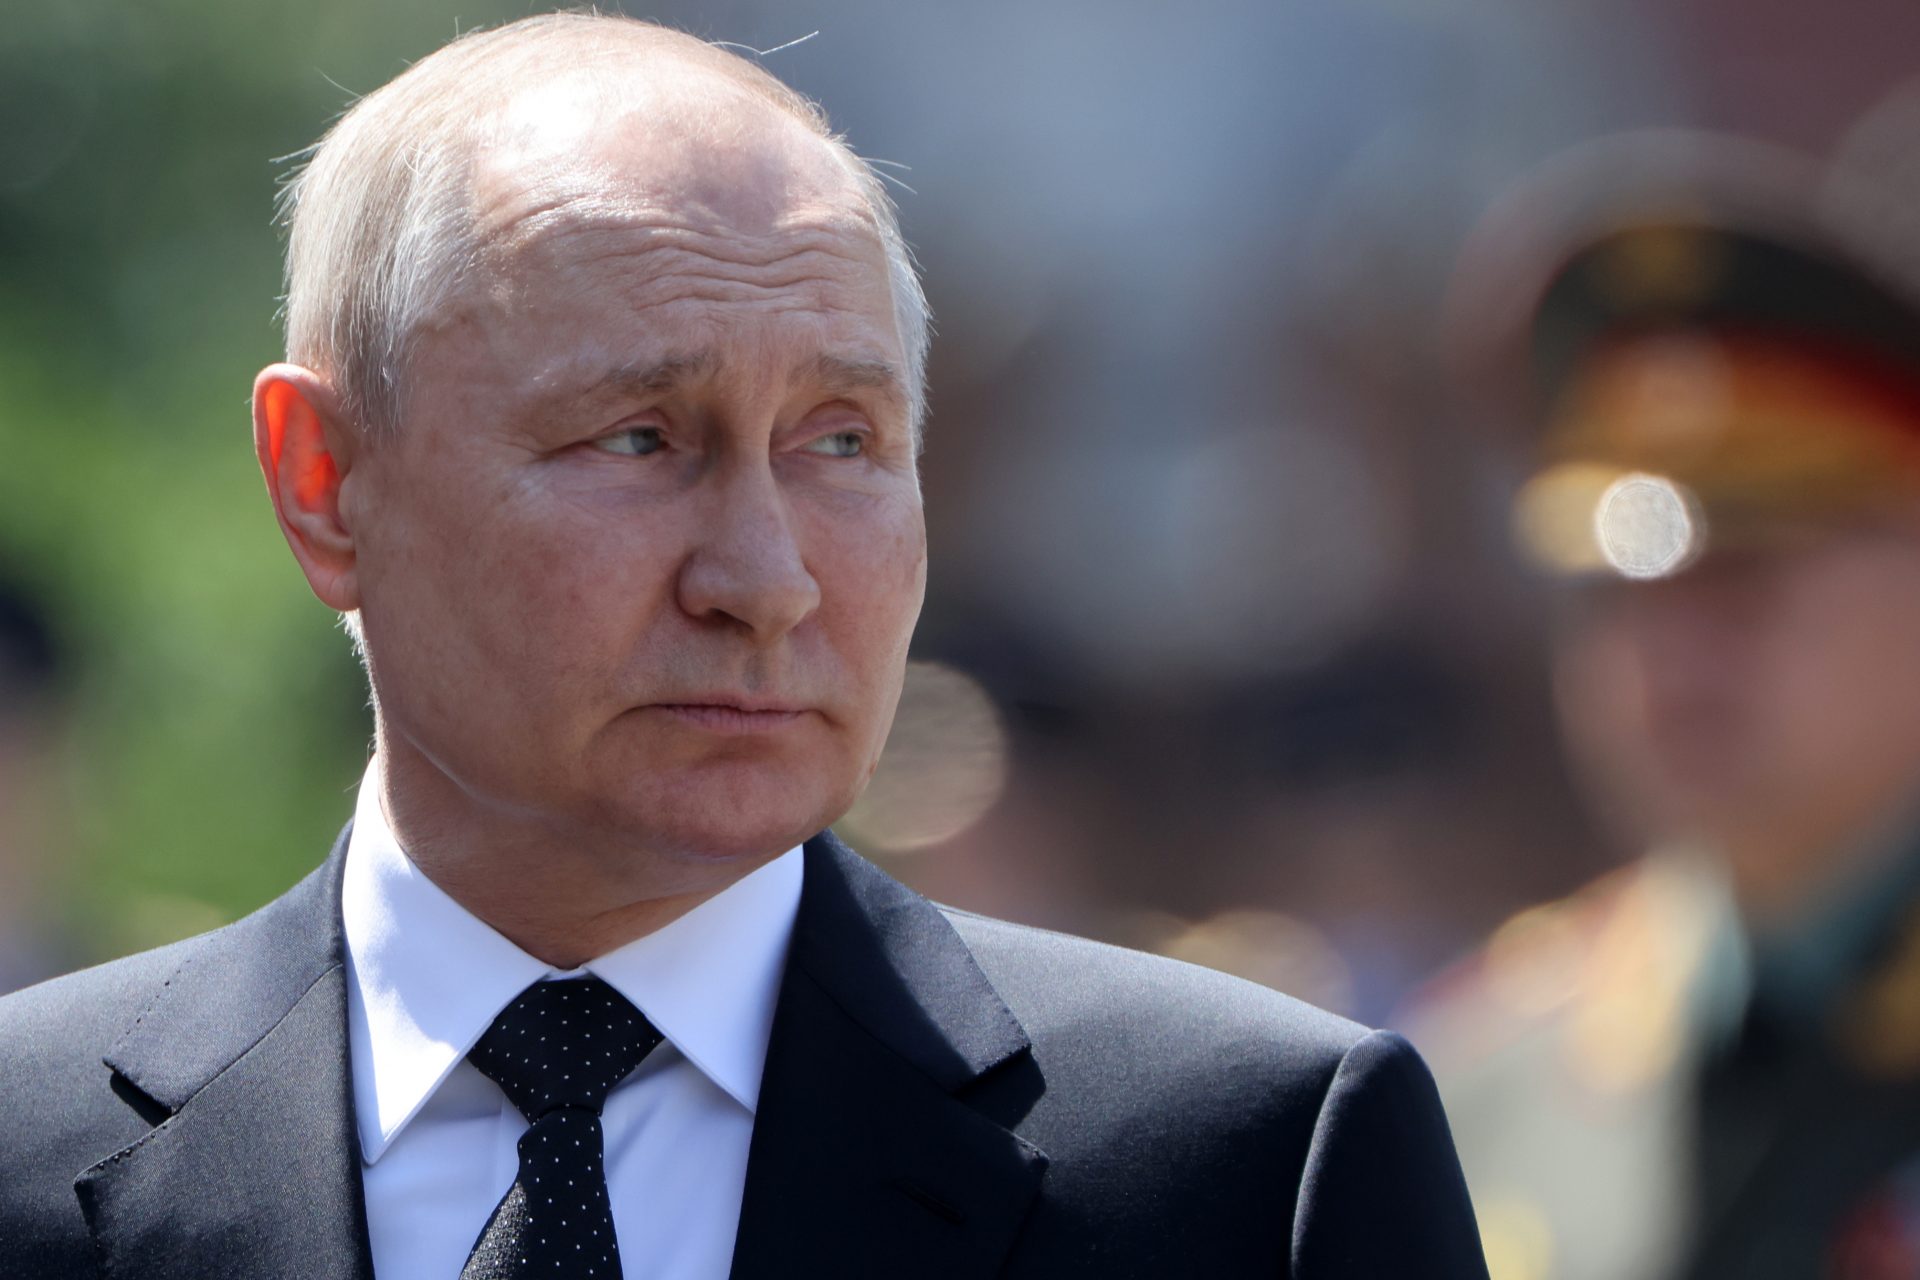 Putin is digging Russia into economic disaster